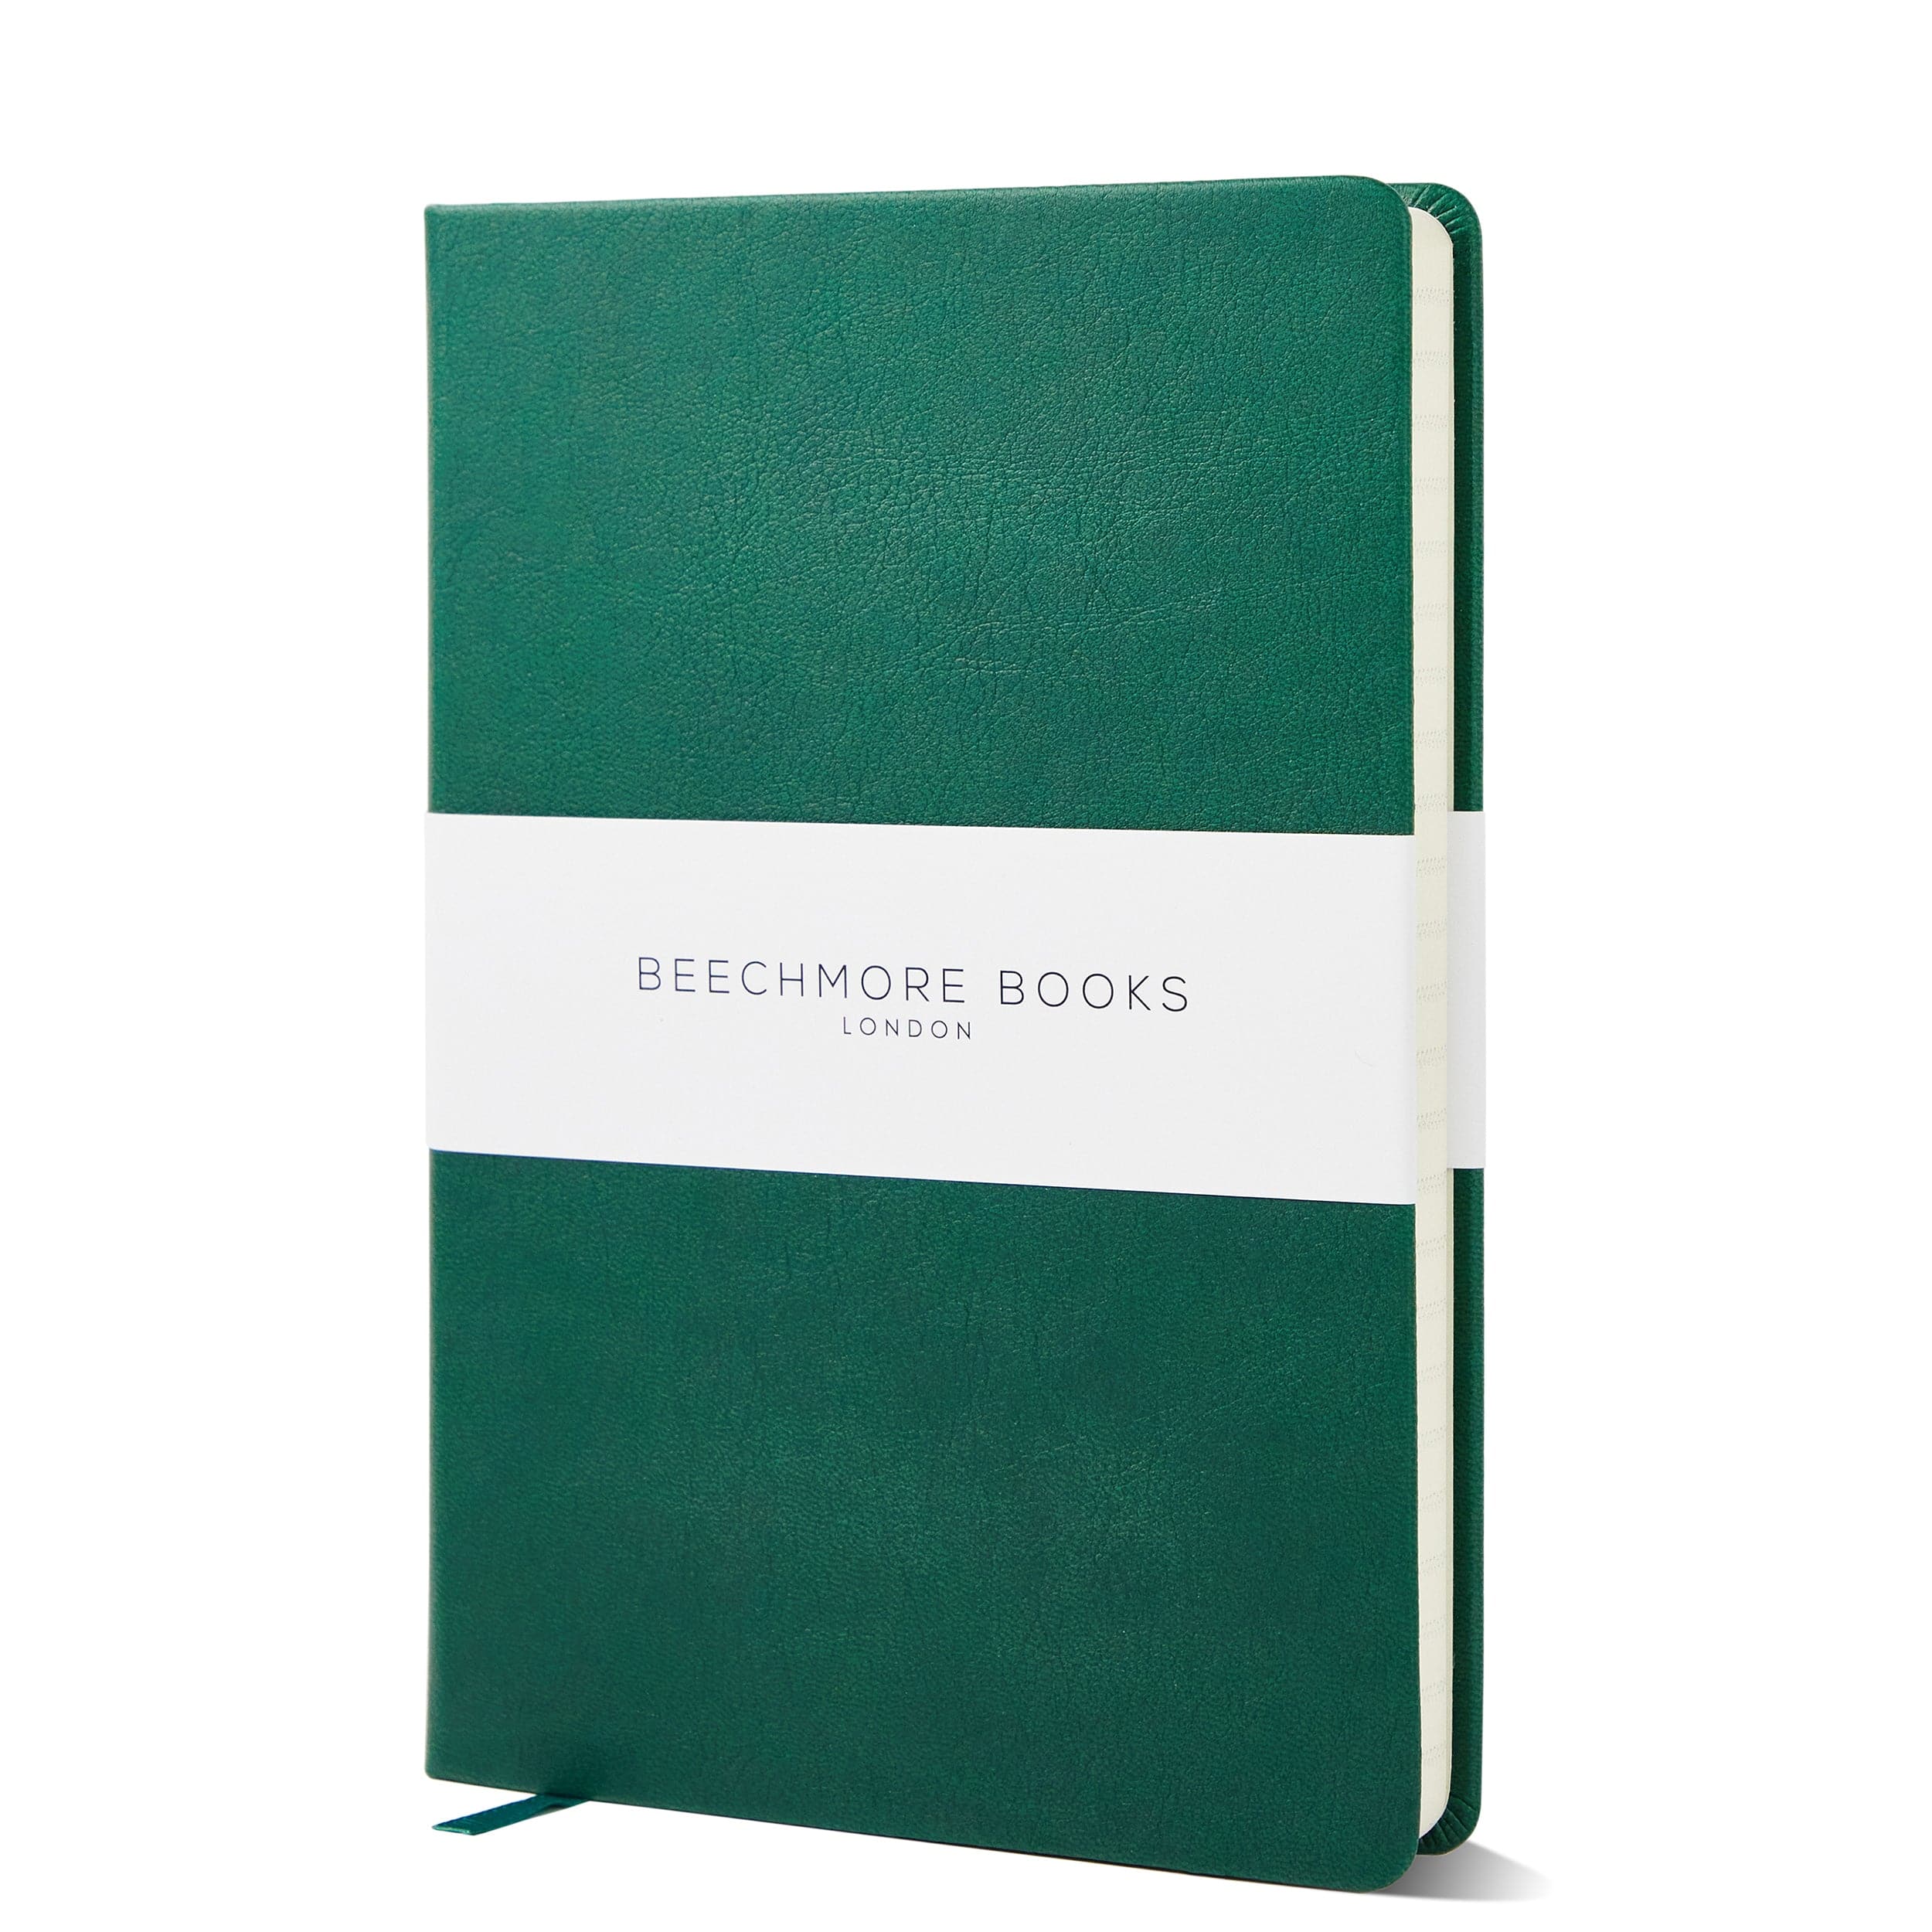 Garden-fresh Dartmouth Green A5 graph notebook, designed for planners and eco-conscious minds.